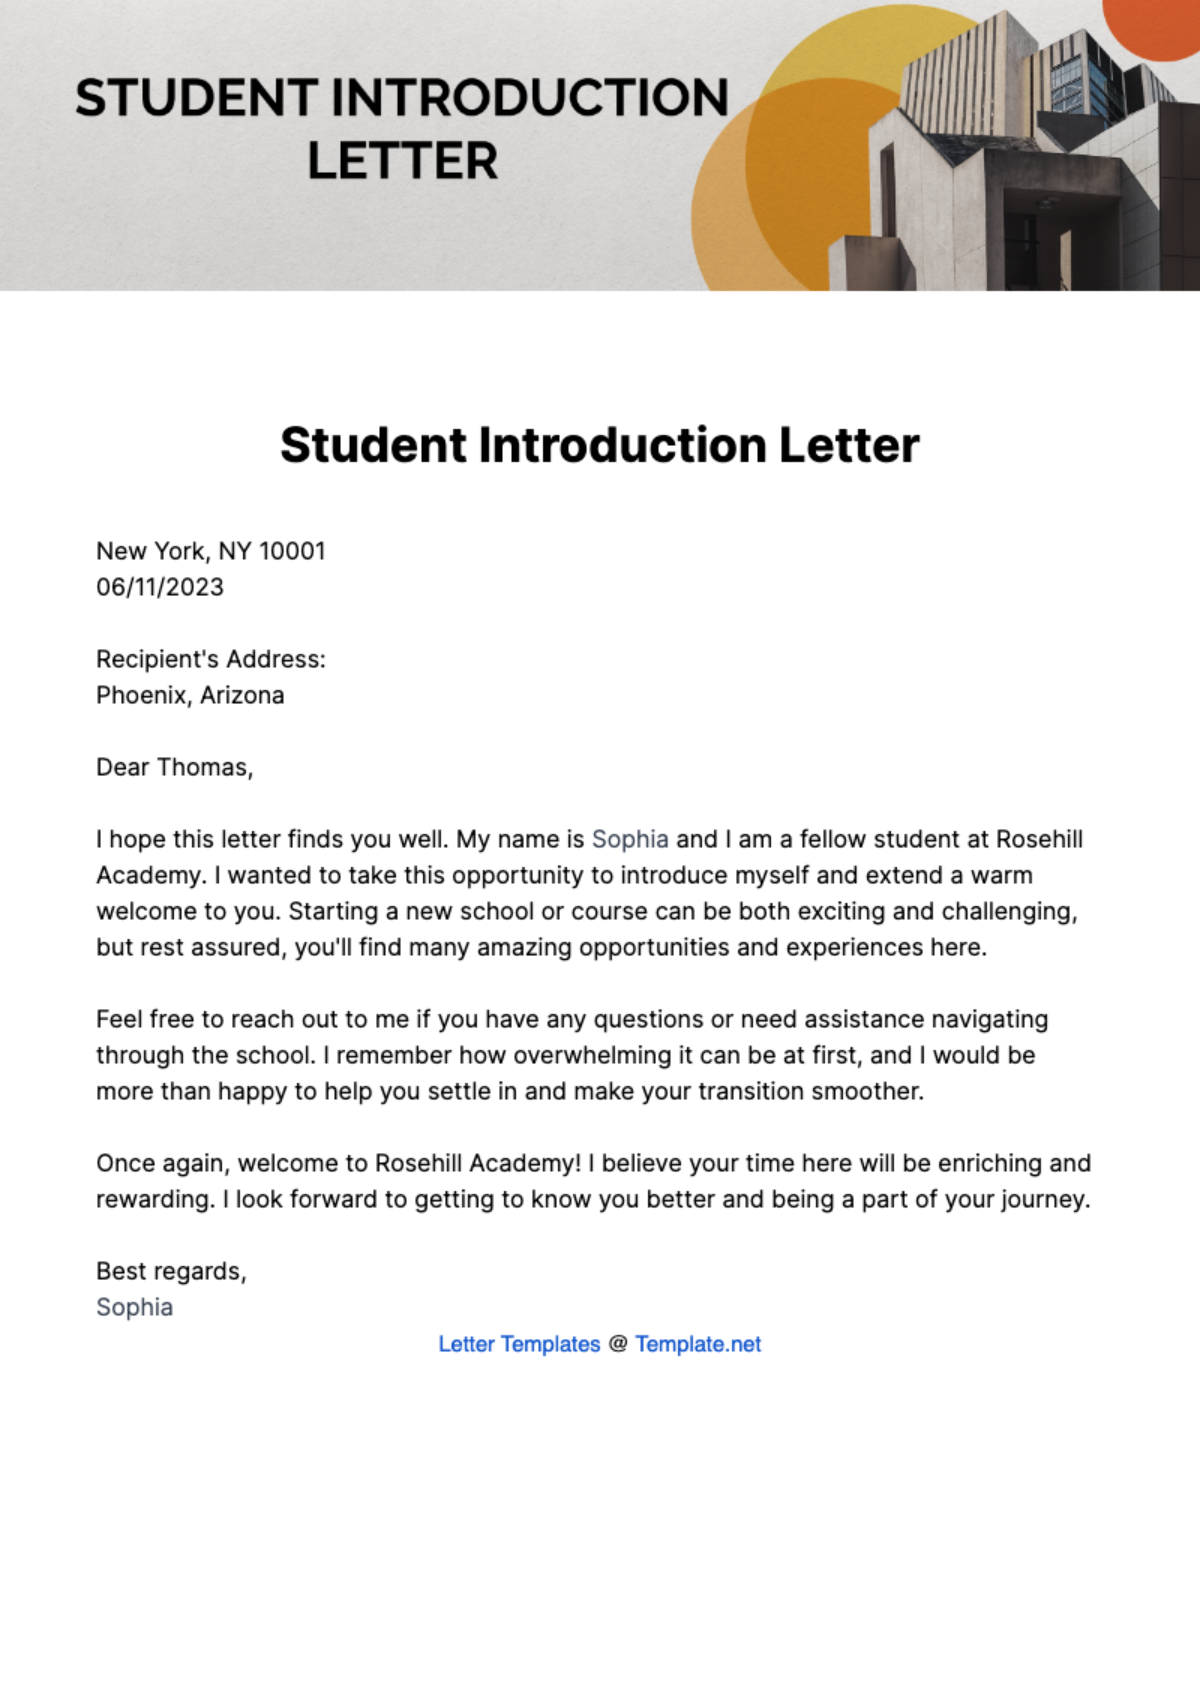 Student Introduction Letter Template